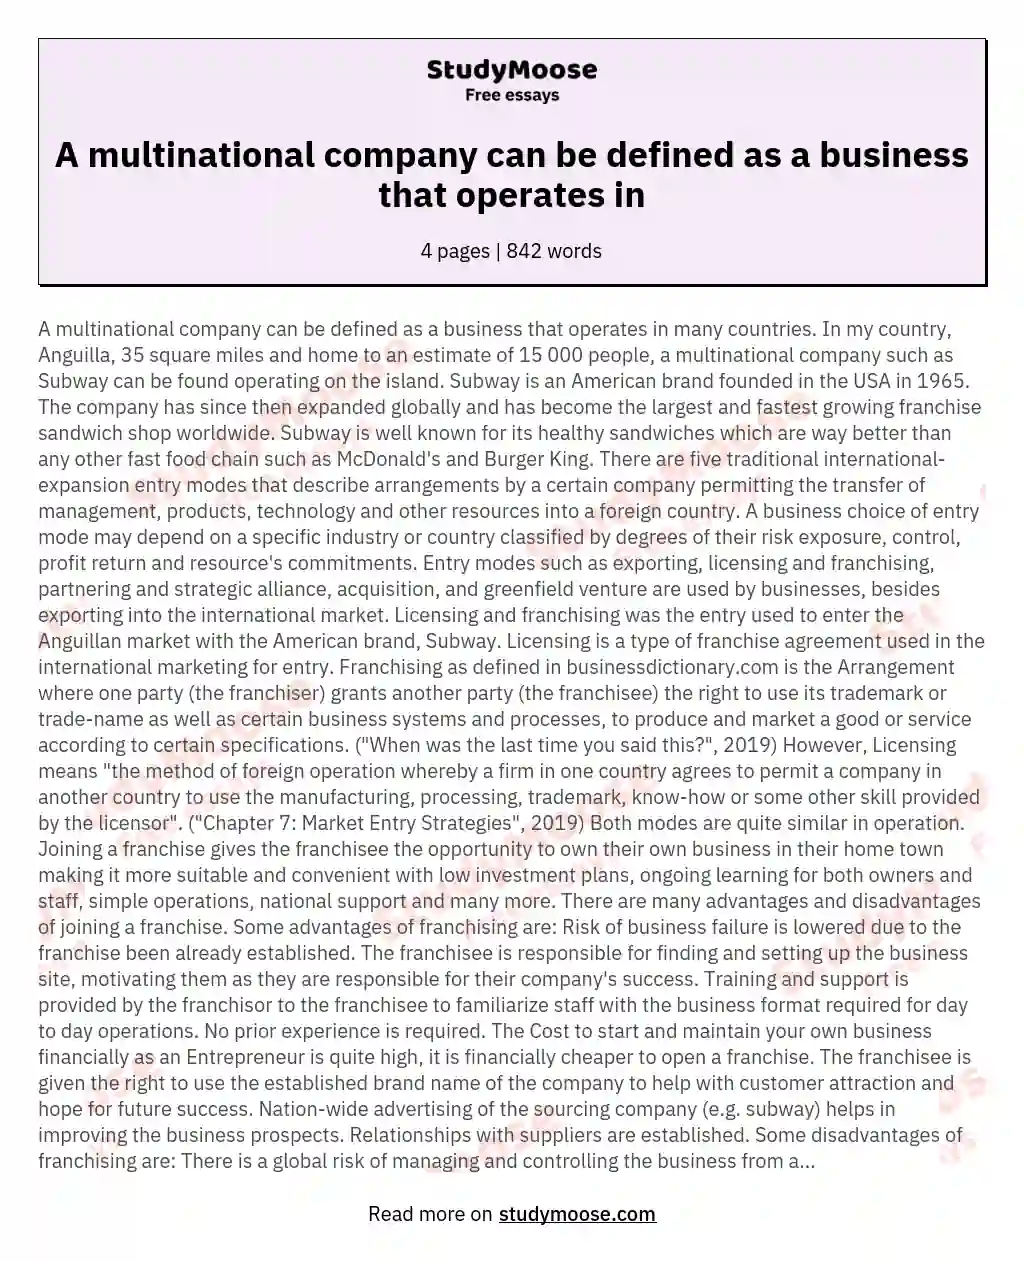 A multinational company can be defined as a business that operates in